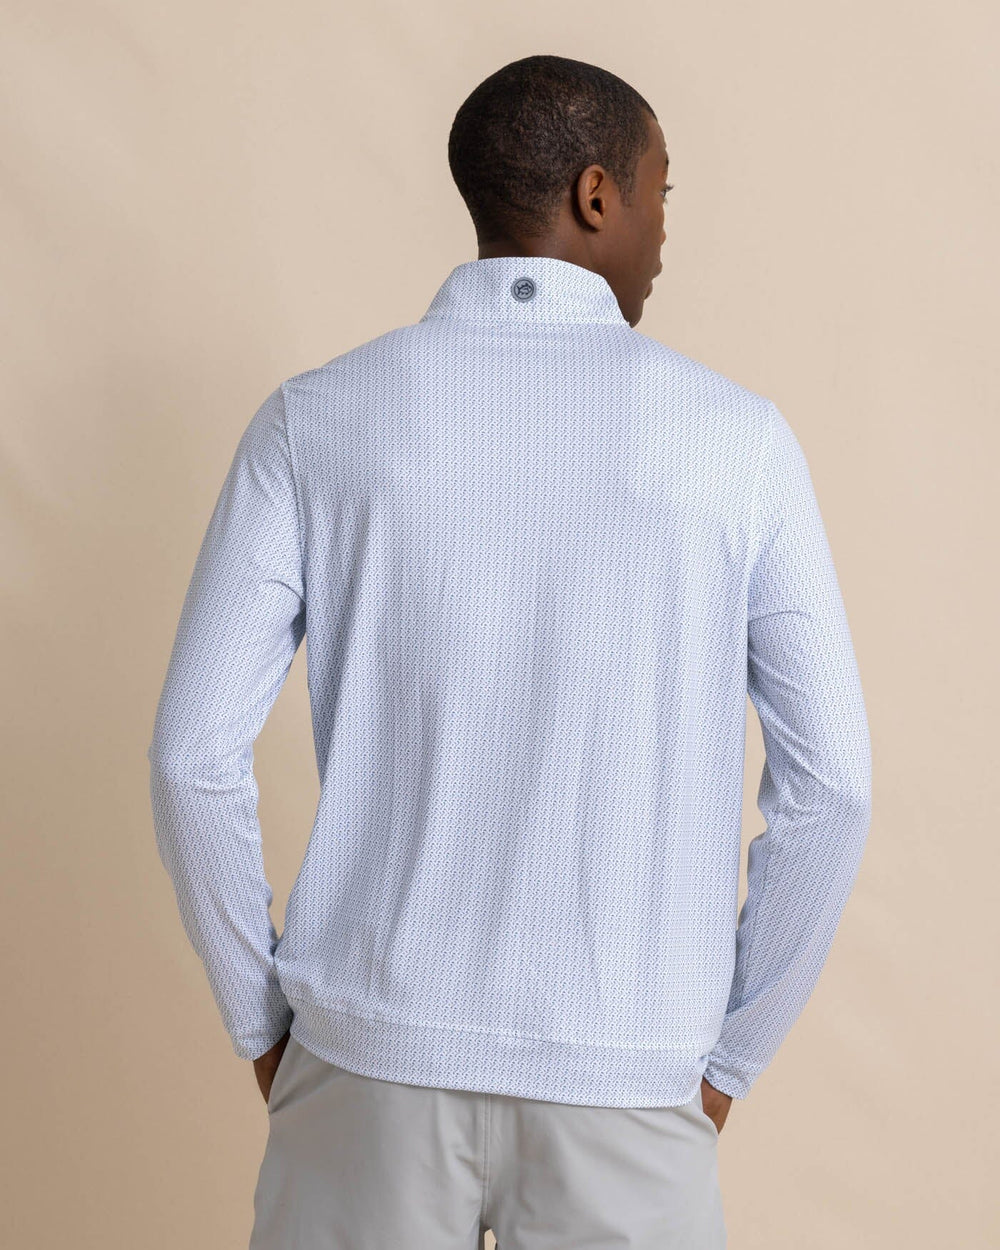 The back view of the Southern Tide Clubbin It Print Cruiser Quarter Zip by Southern Tide - Classic White